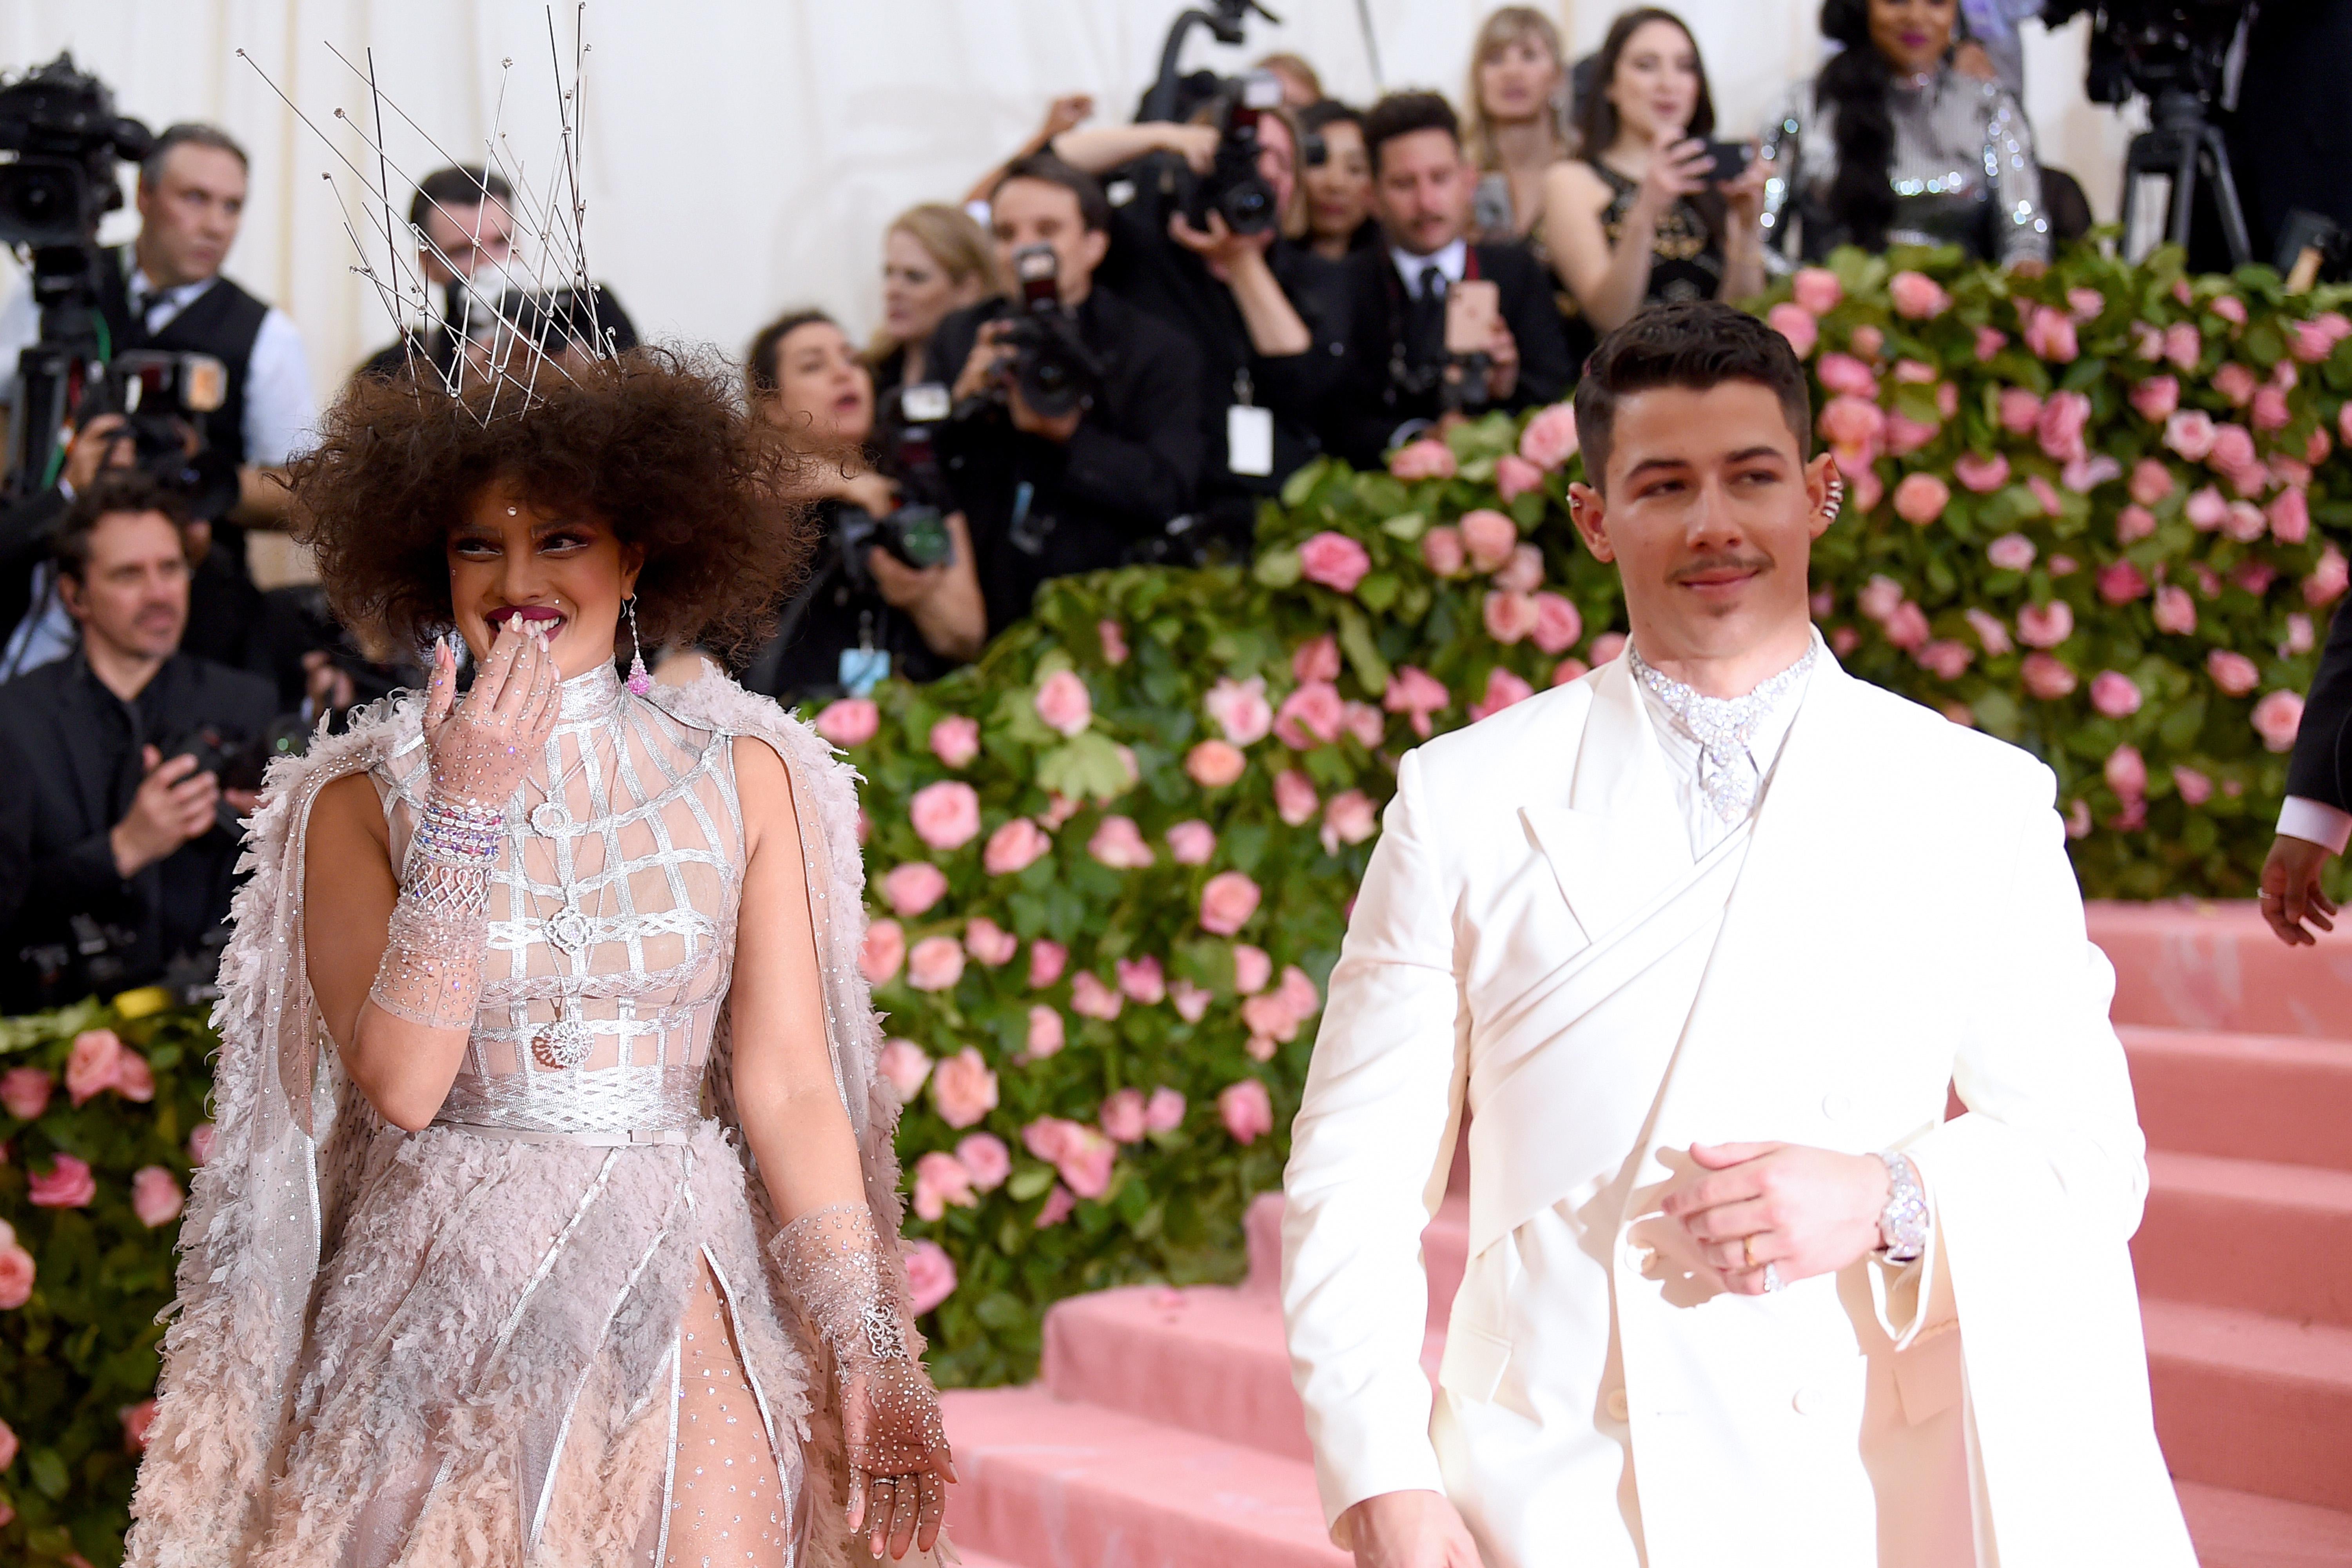 NEW YORK, NEW YORK - MAY 06: Priyanka Chopra and Nick Jonas attend The 2019 Met Gala Celebrating Camp: Notes on Fashion at Metropolitan Museum of Art on May 06, 2019 in New York City. (Photo by Jamie McCarthy/Getty Images)